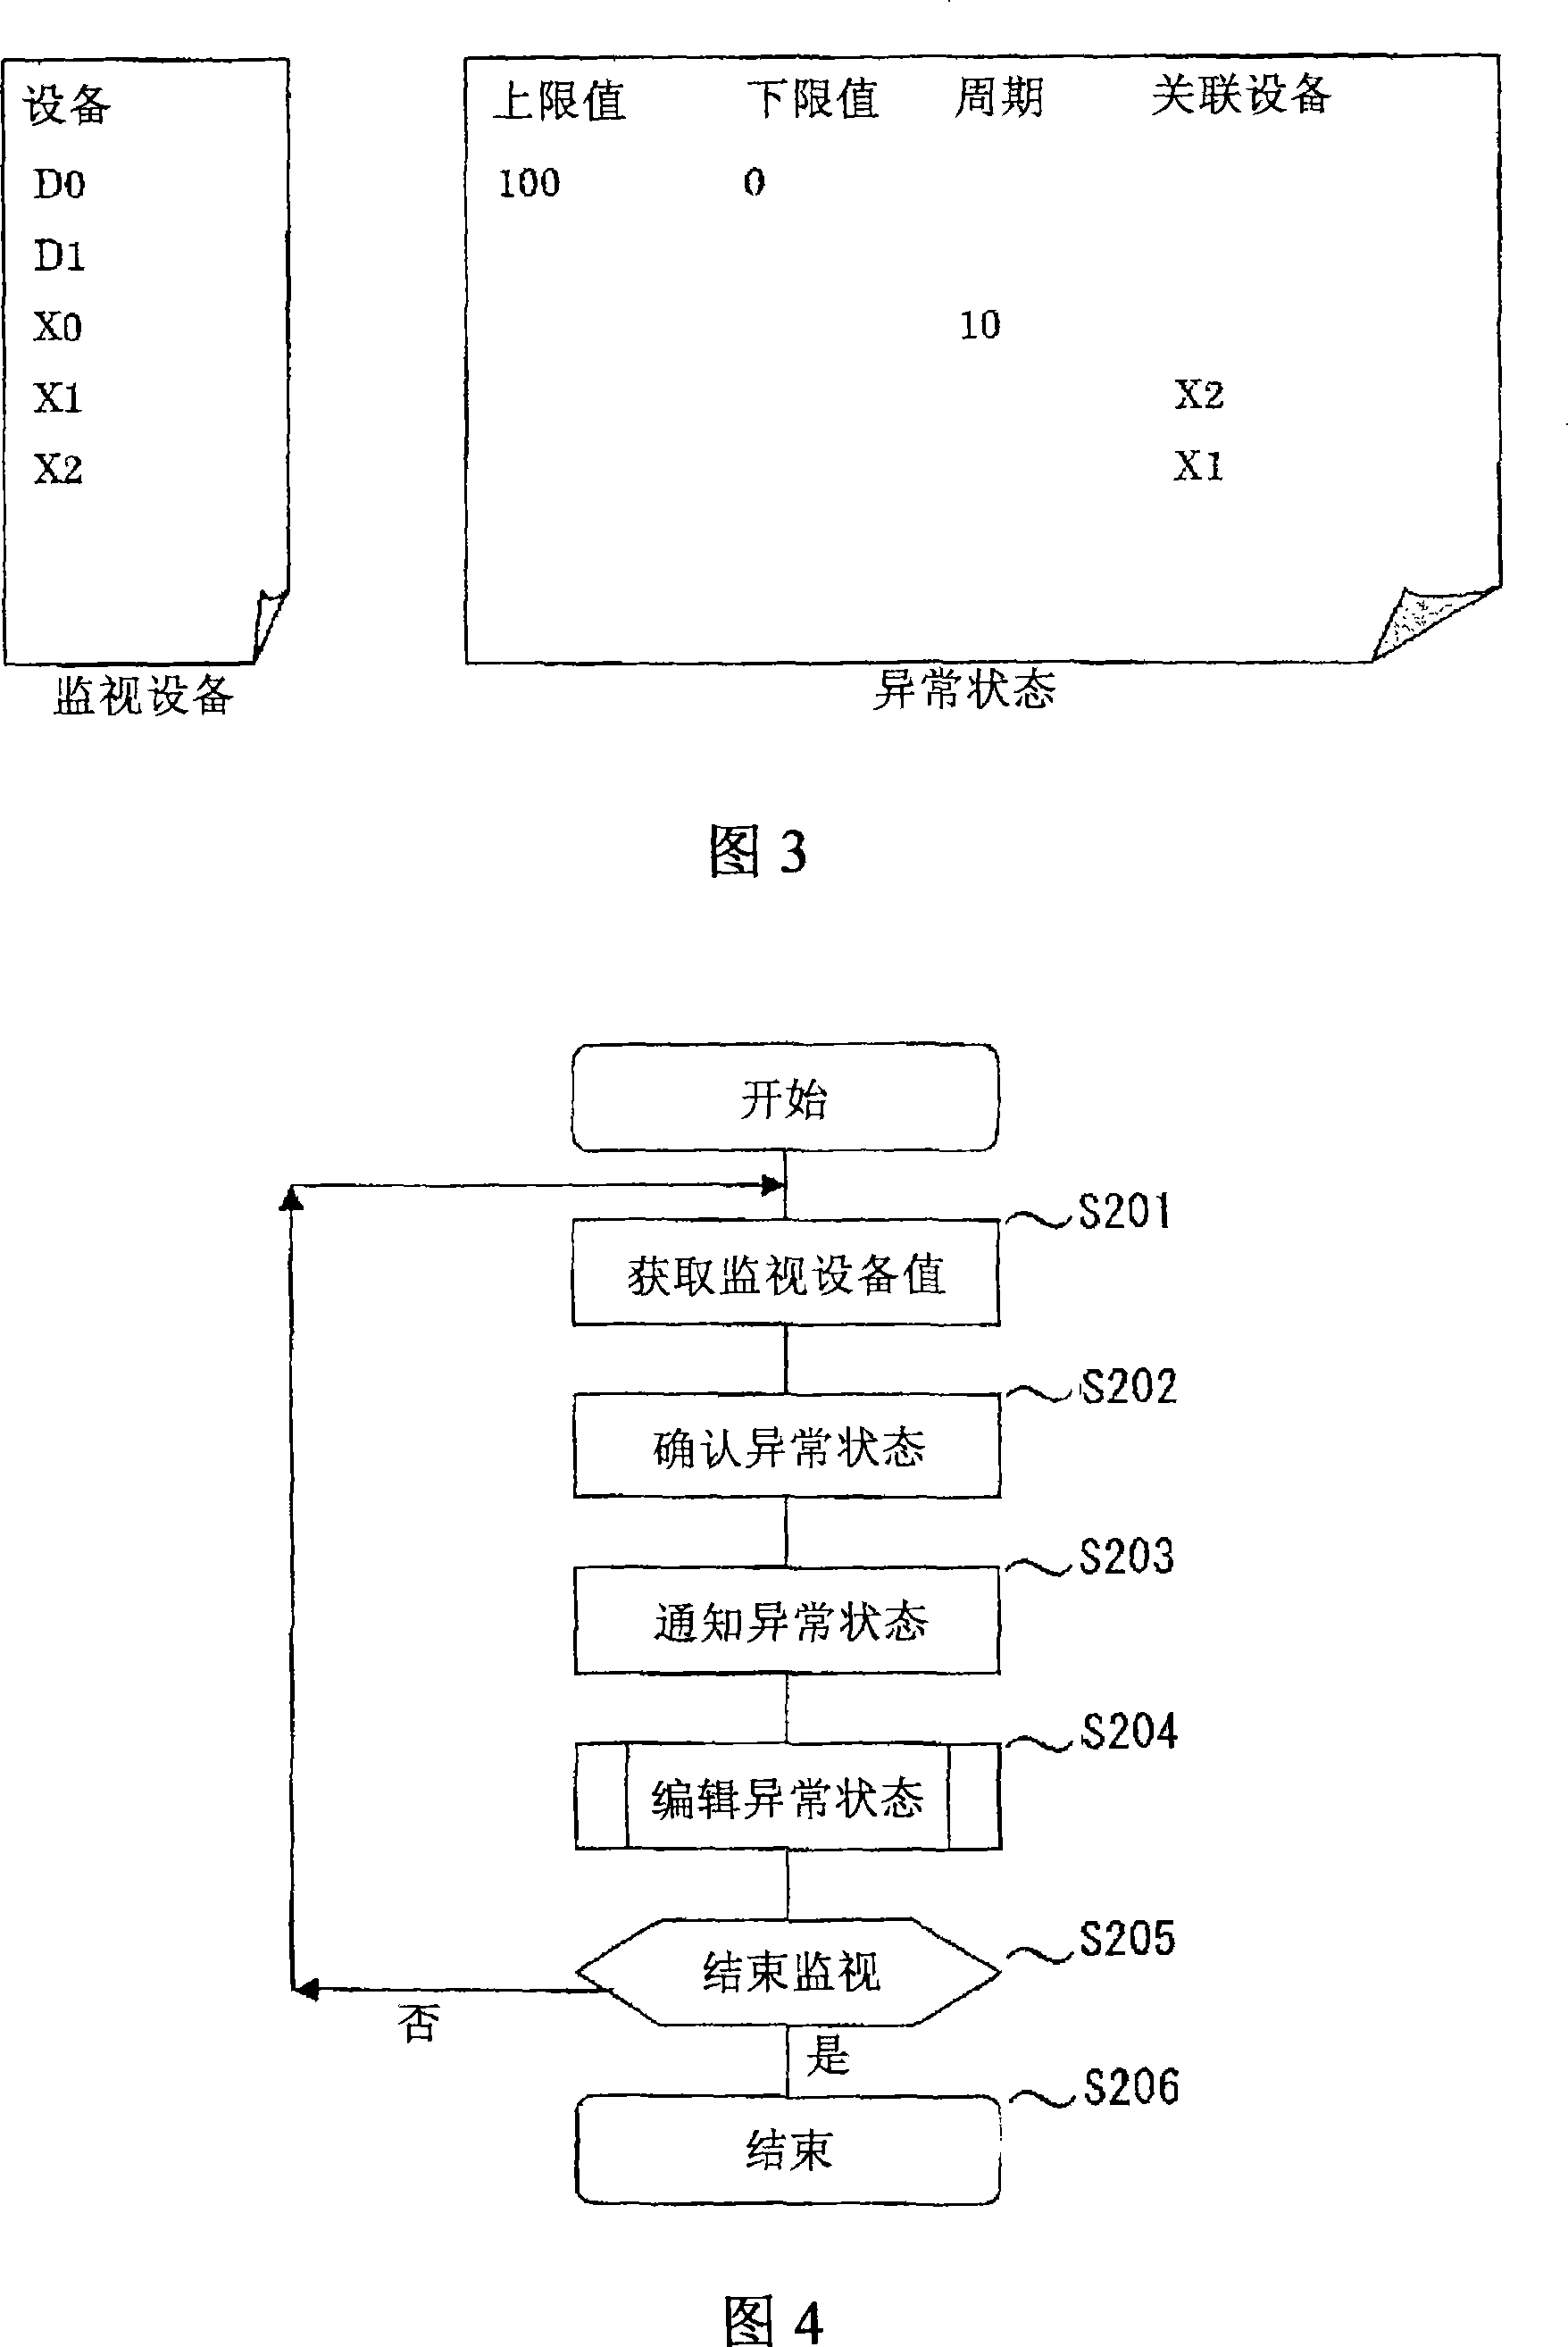 Data collection device and gateway device